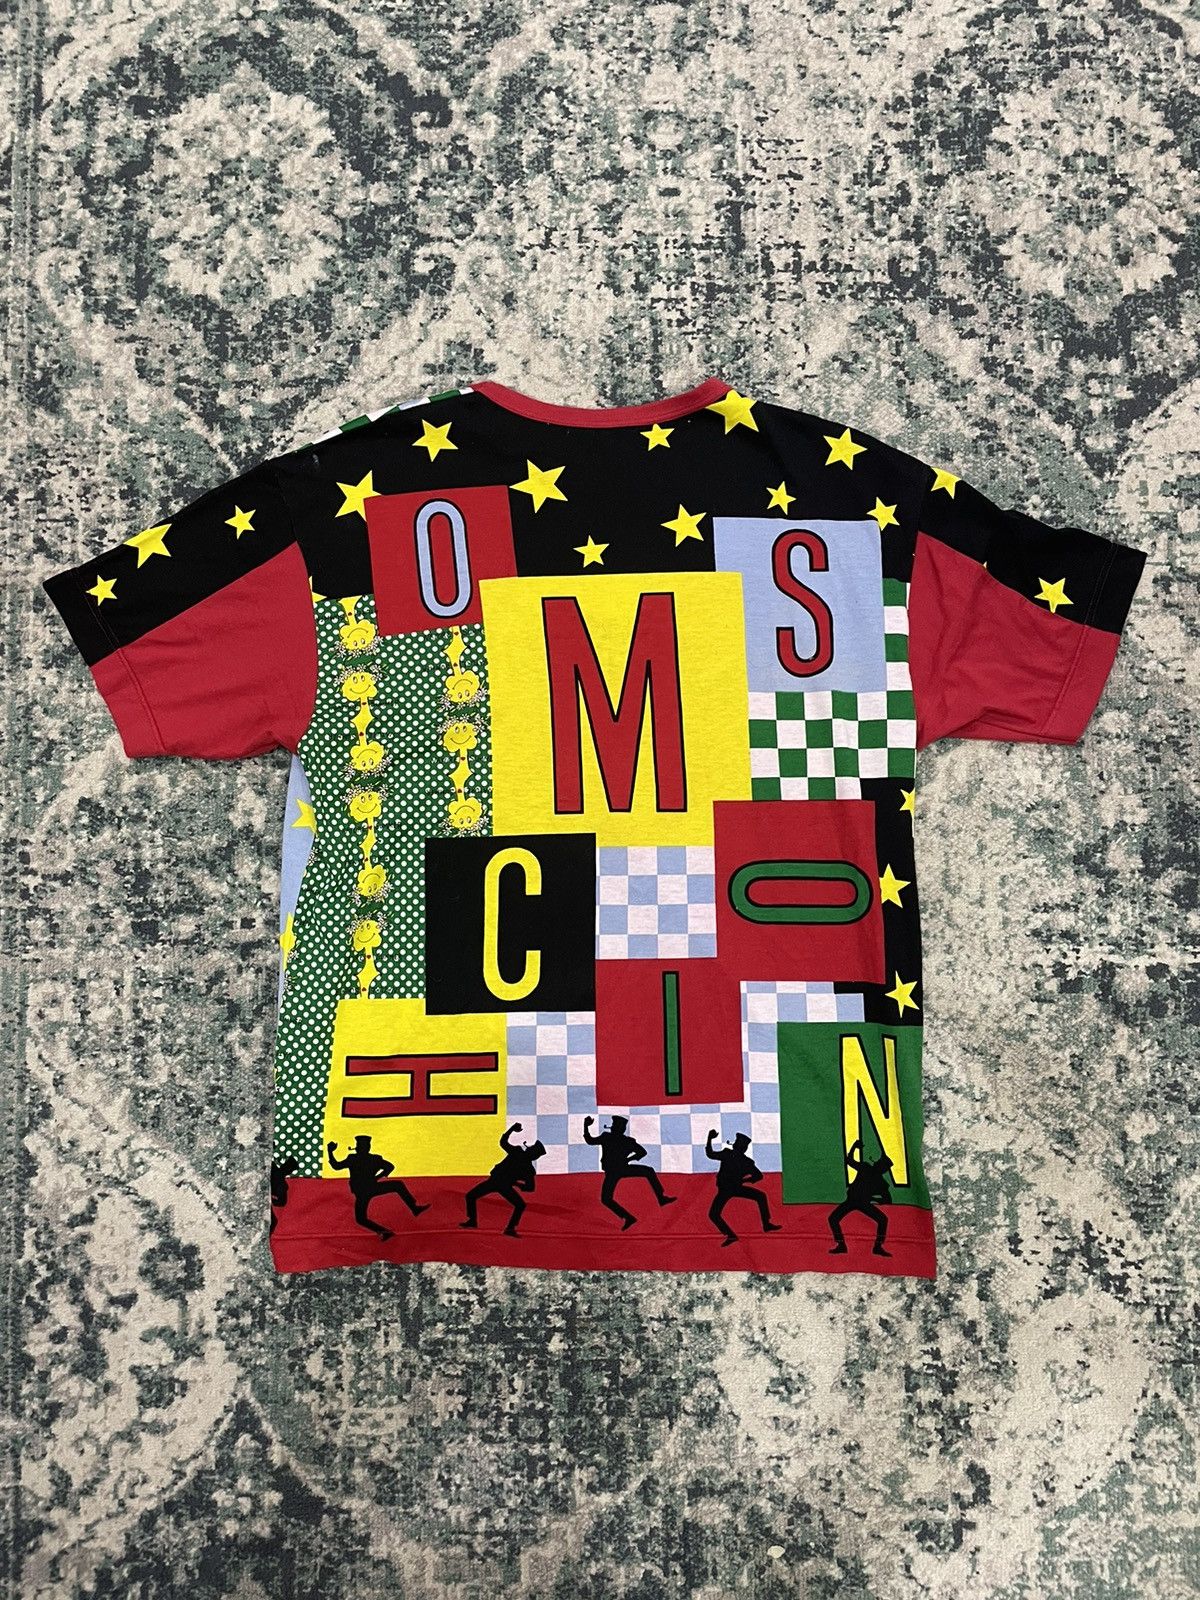 AW1996 Moschino “ Open Your Hearts‘’ T-Shirt Size Medium - 14